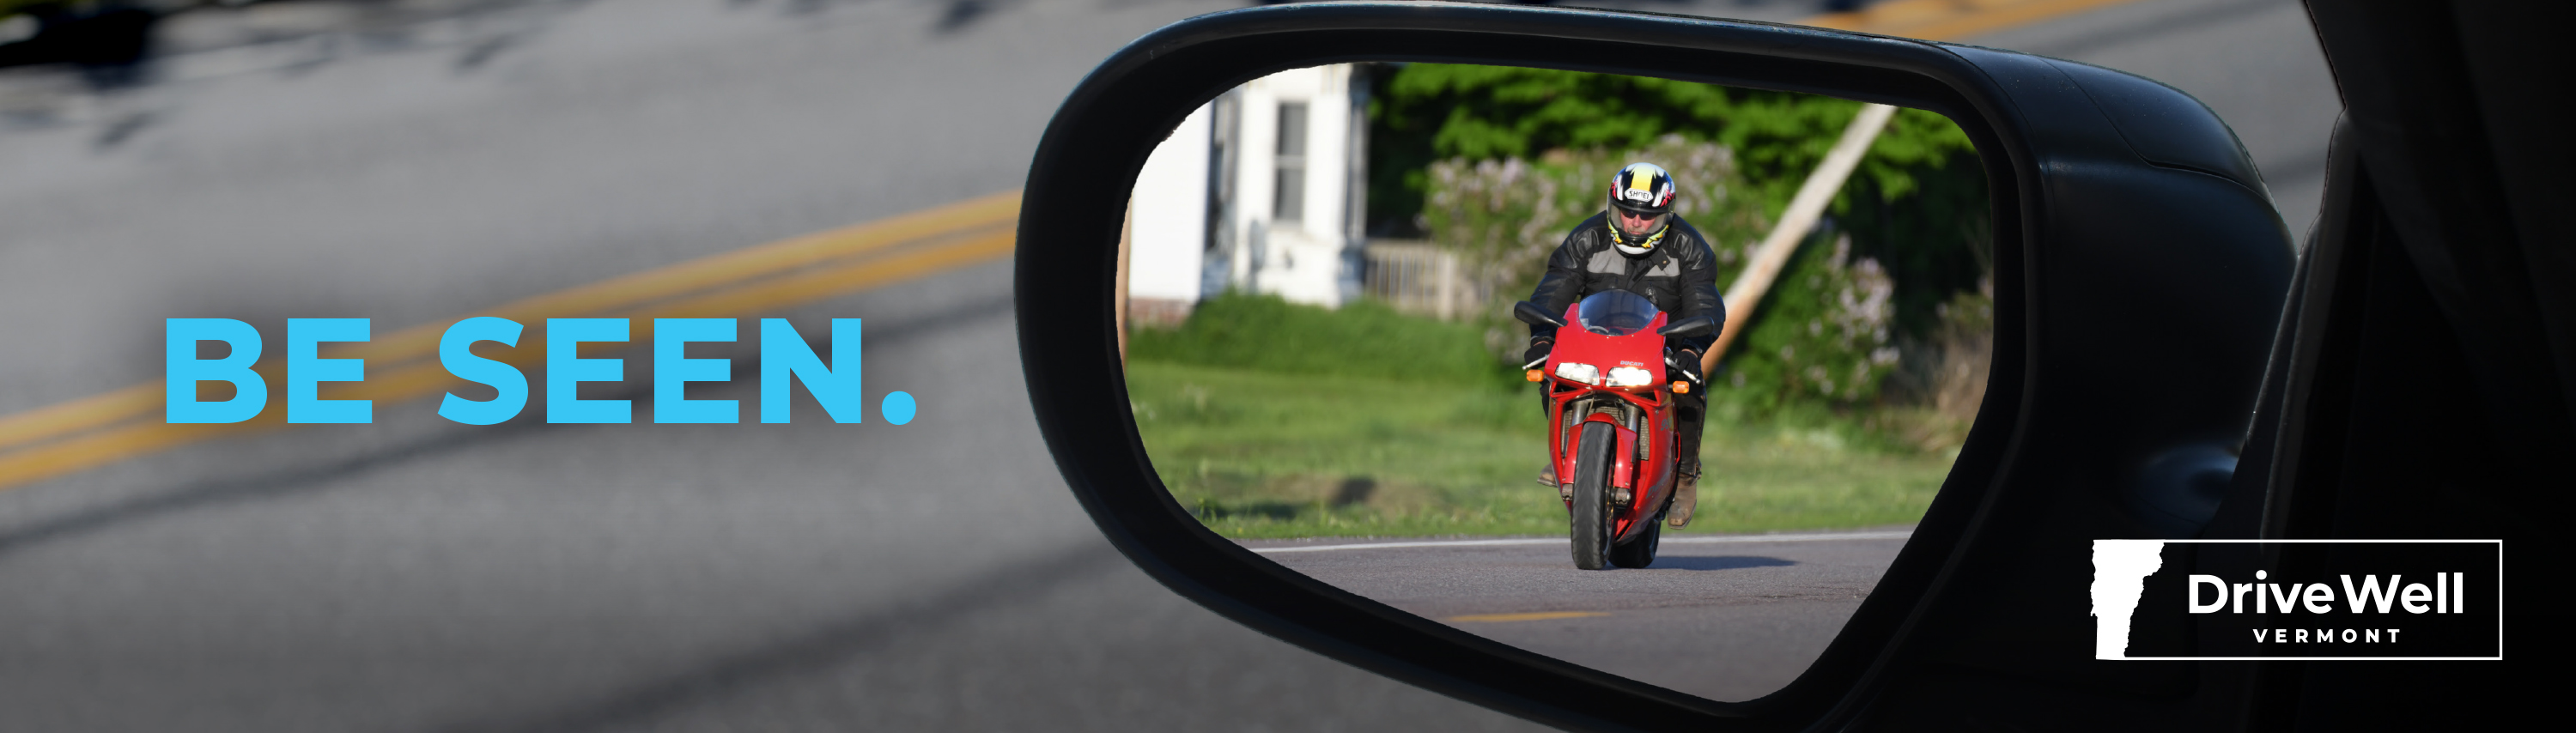 Drive Well Vermont Be Seen motorcycle banner updated